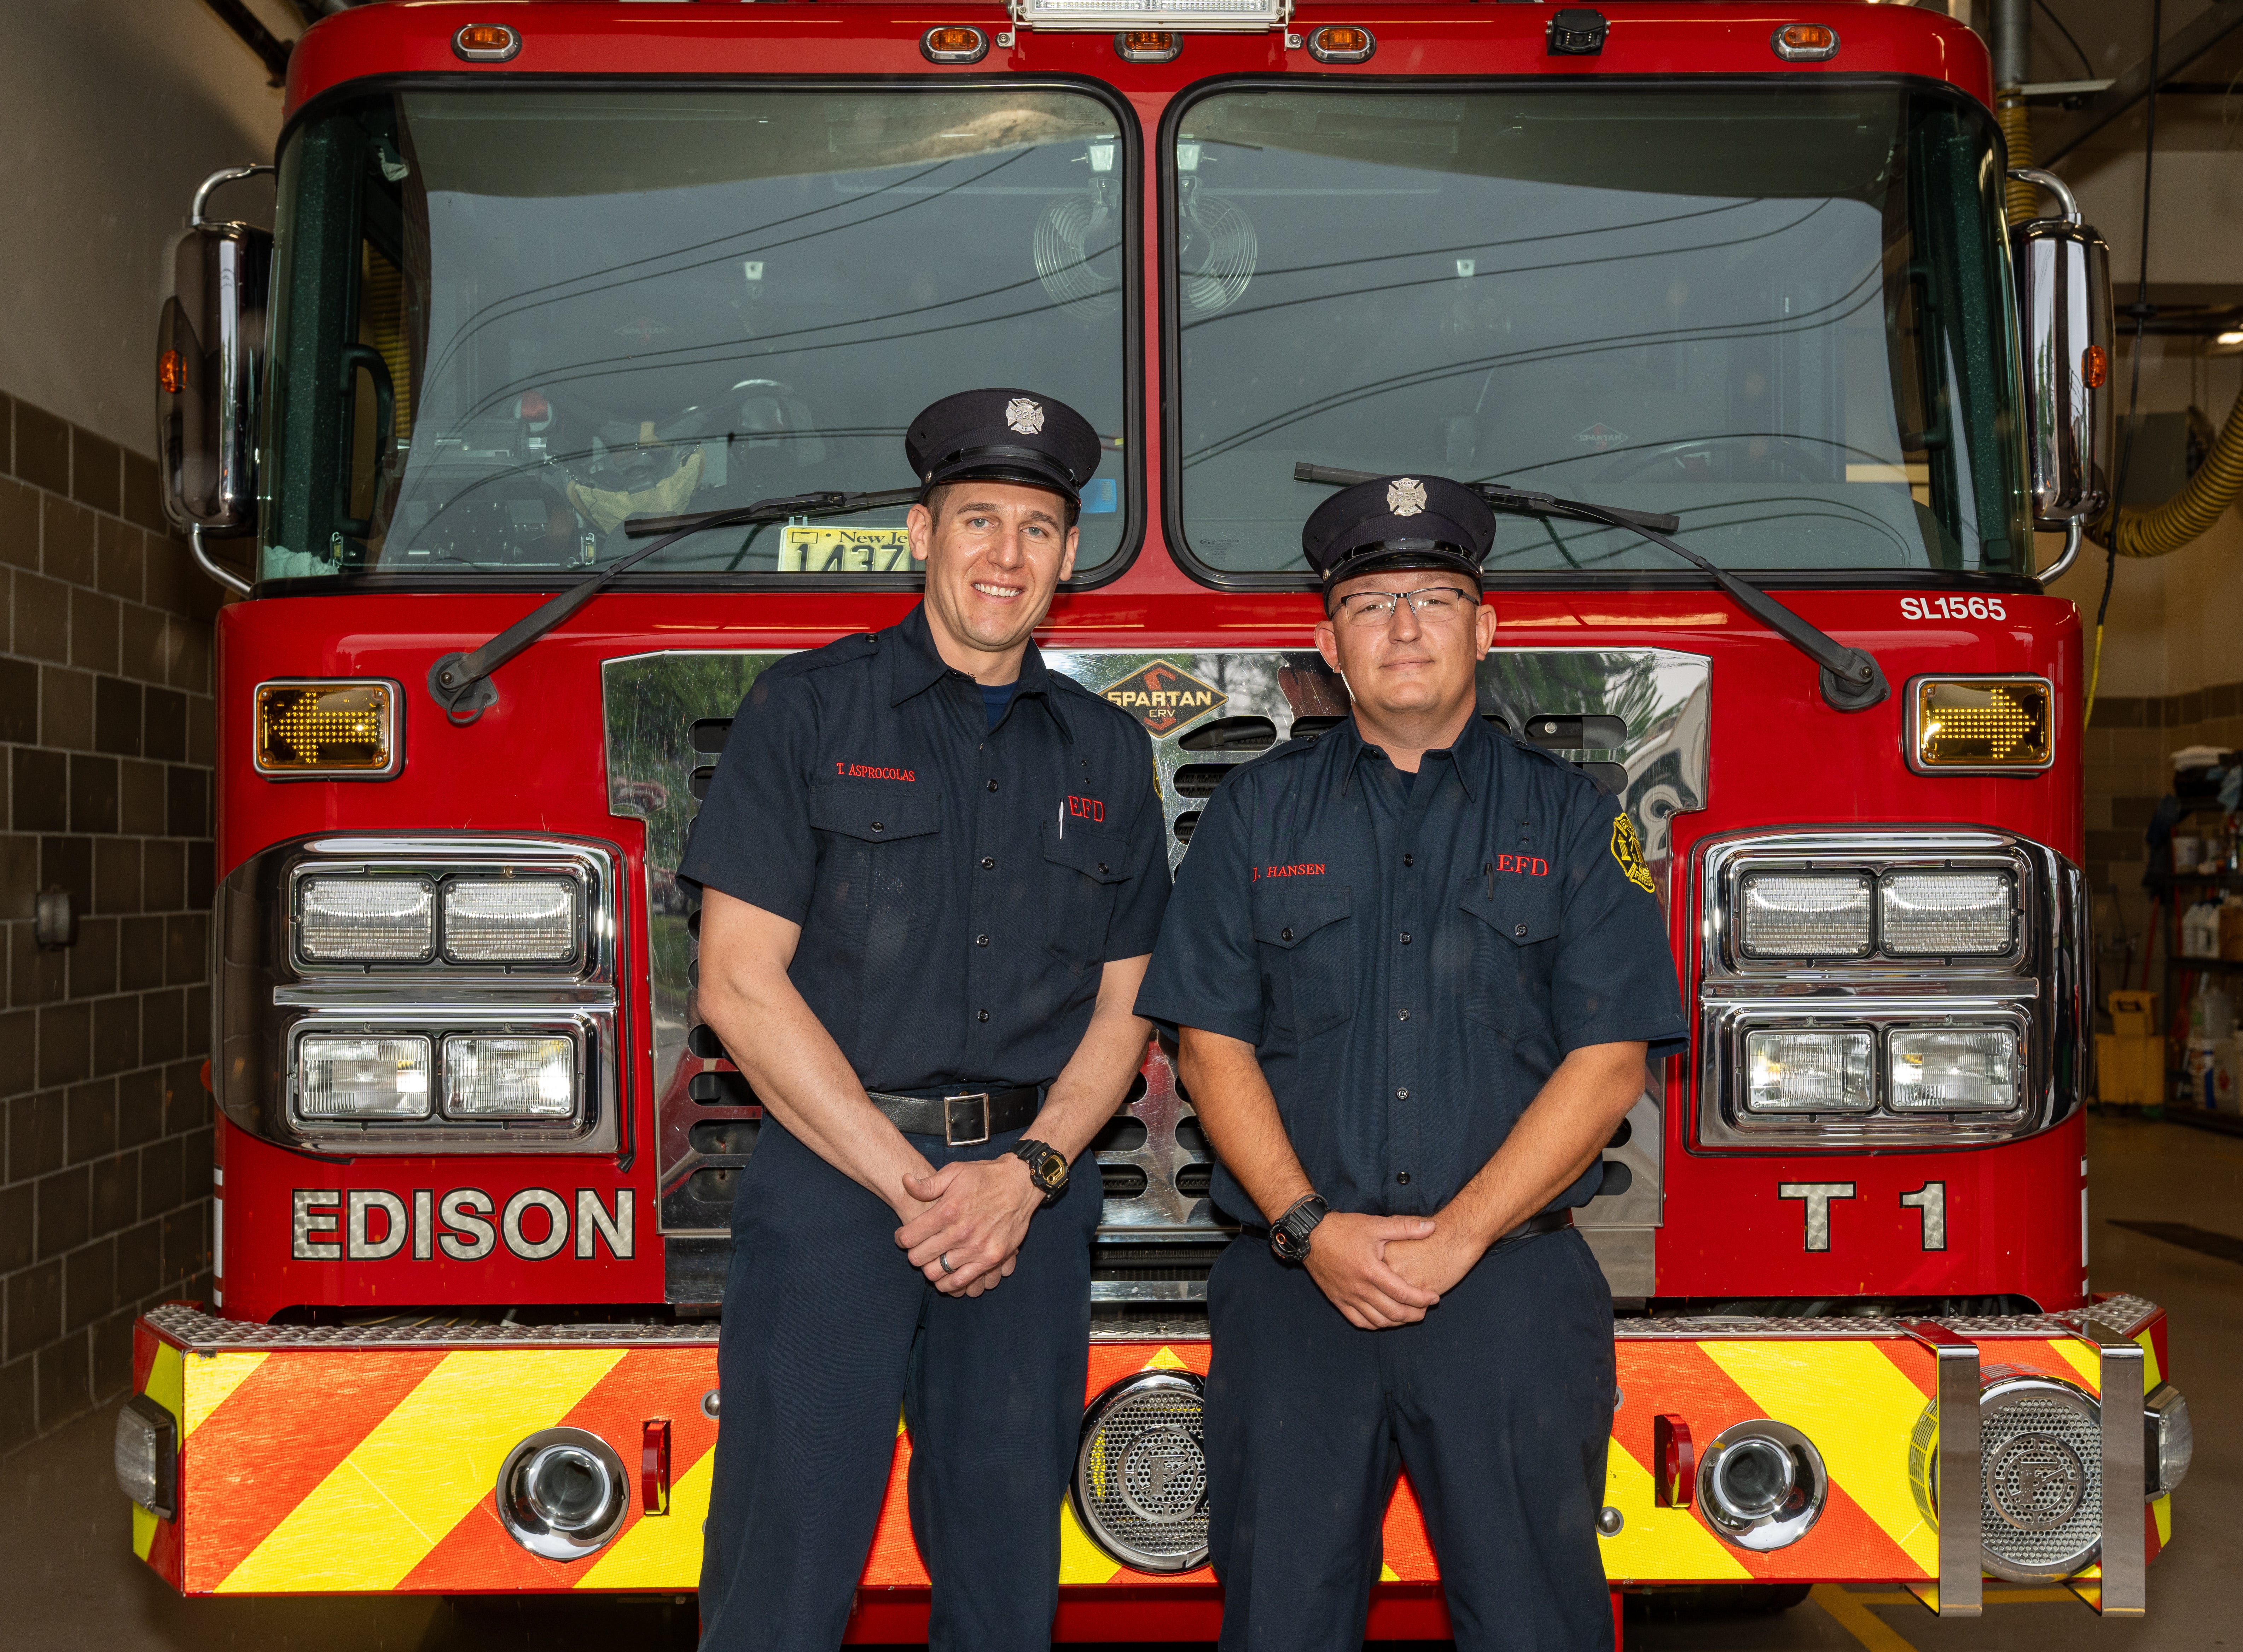 100 Middlesex County first responders to be honored for heroism. These are their stories